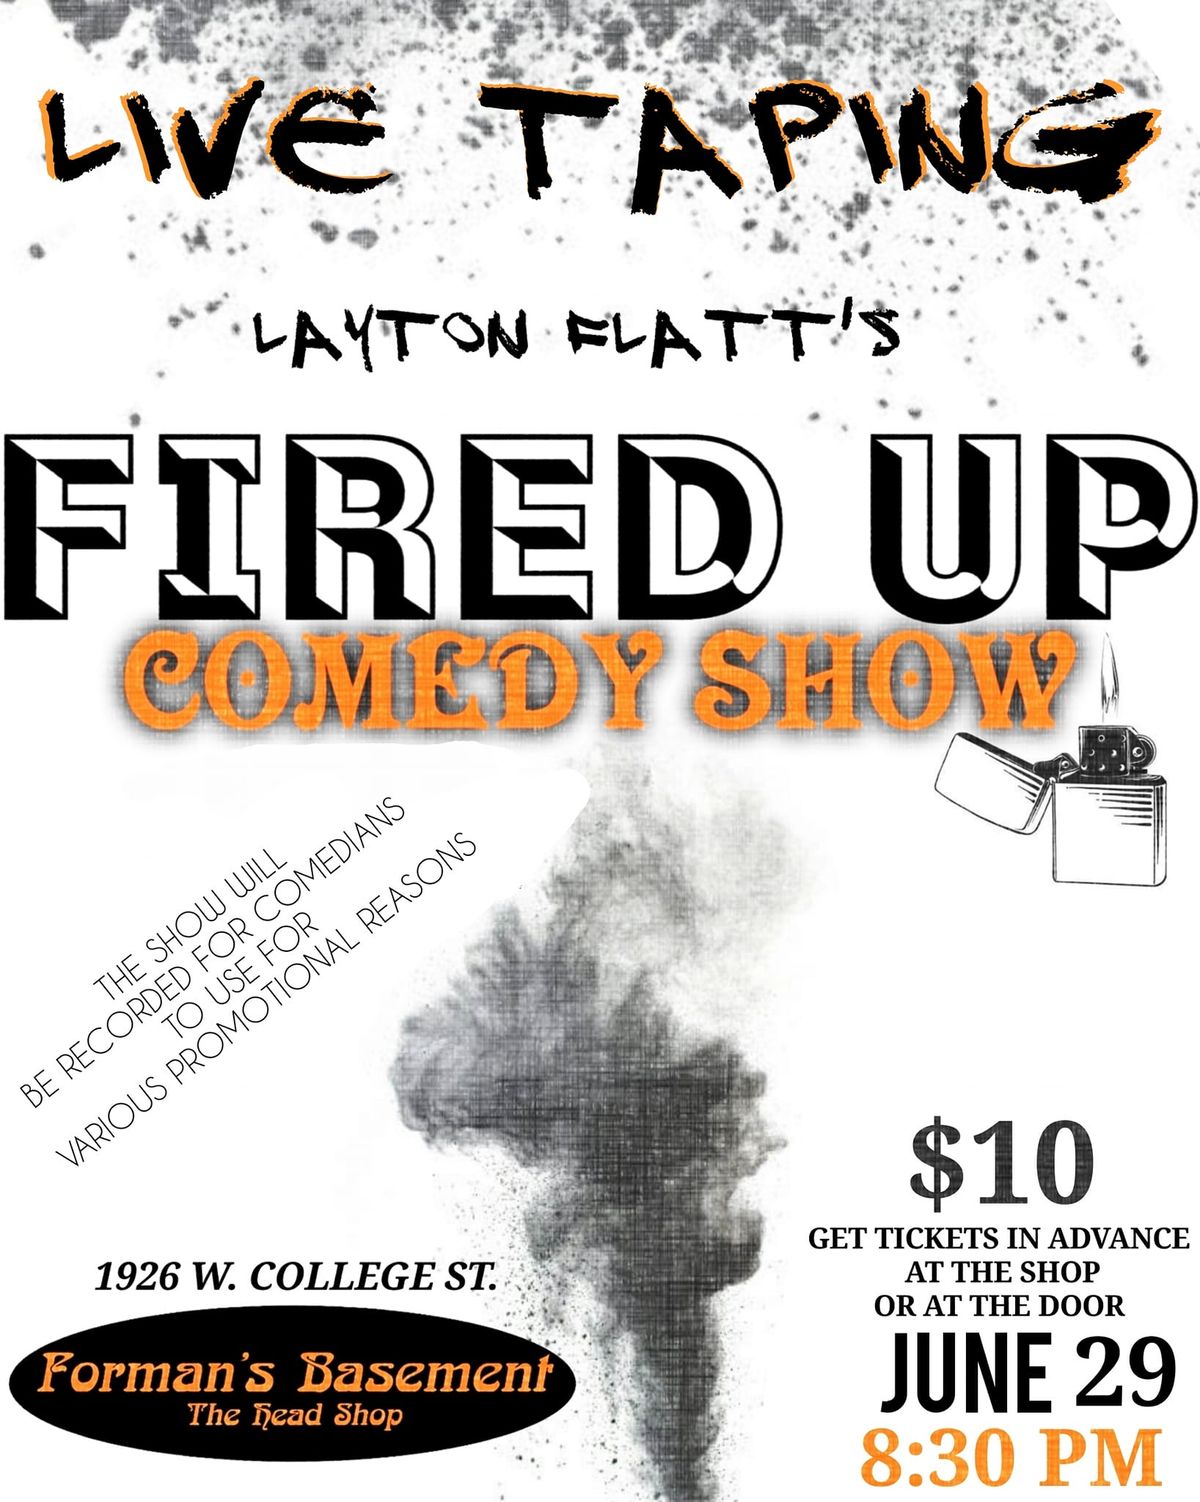 Live Taping at Fired Up Comedy